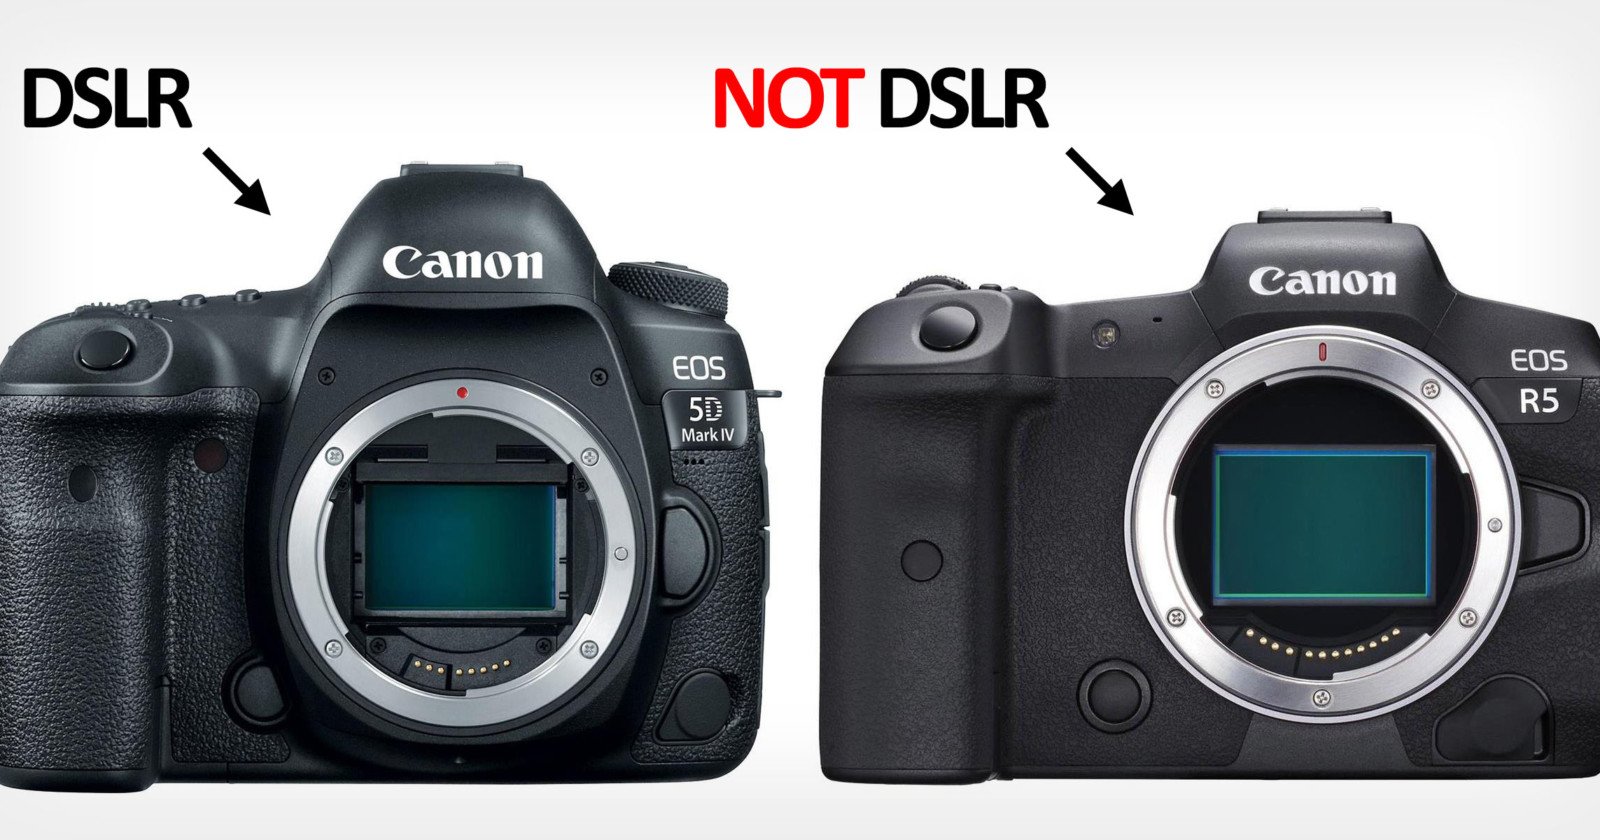 People Have No Idea What a DSLR Actually Is